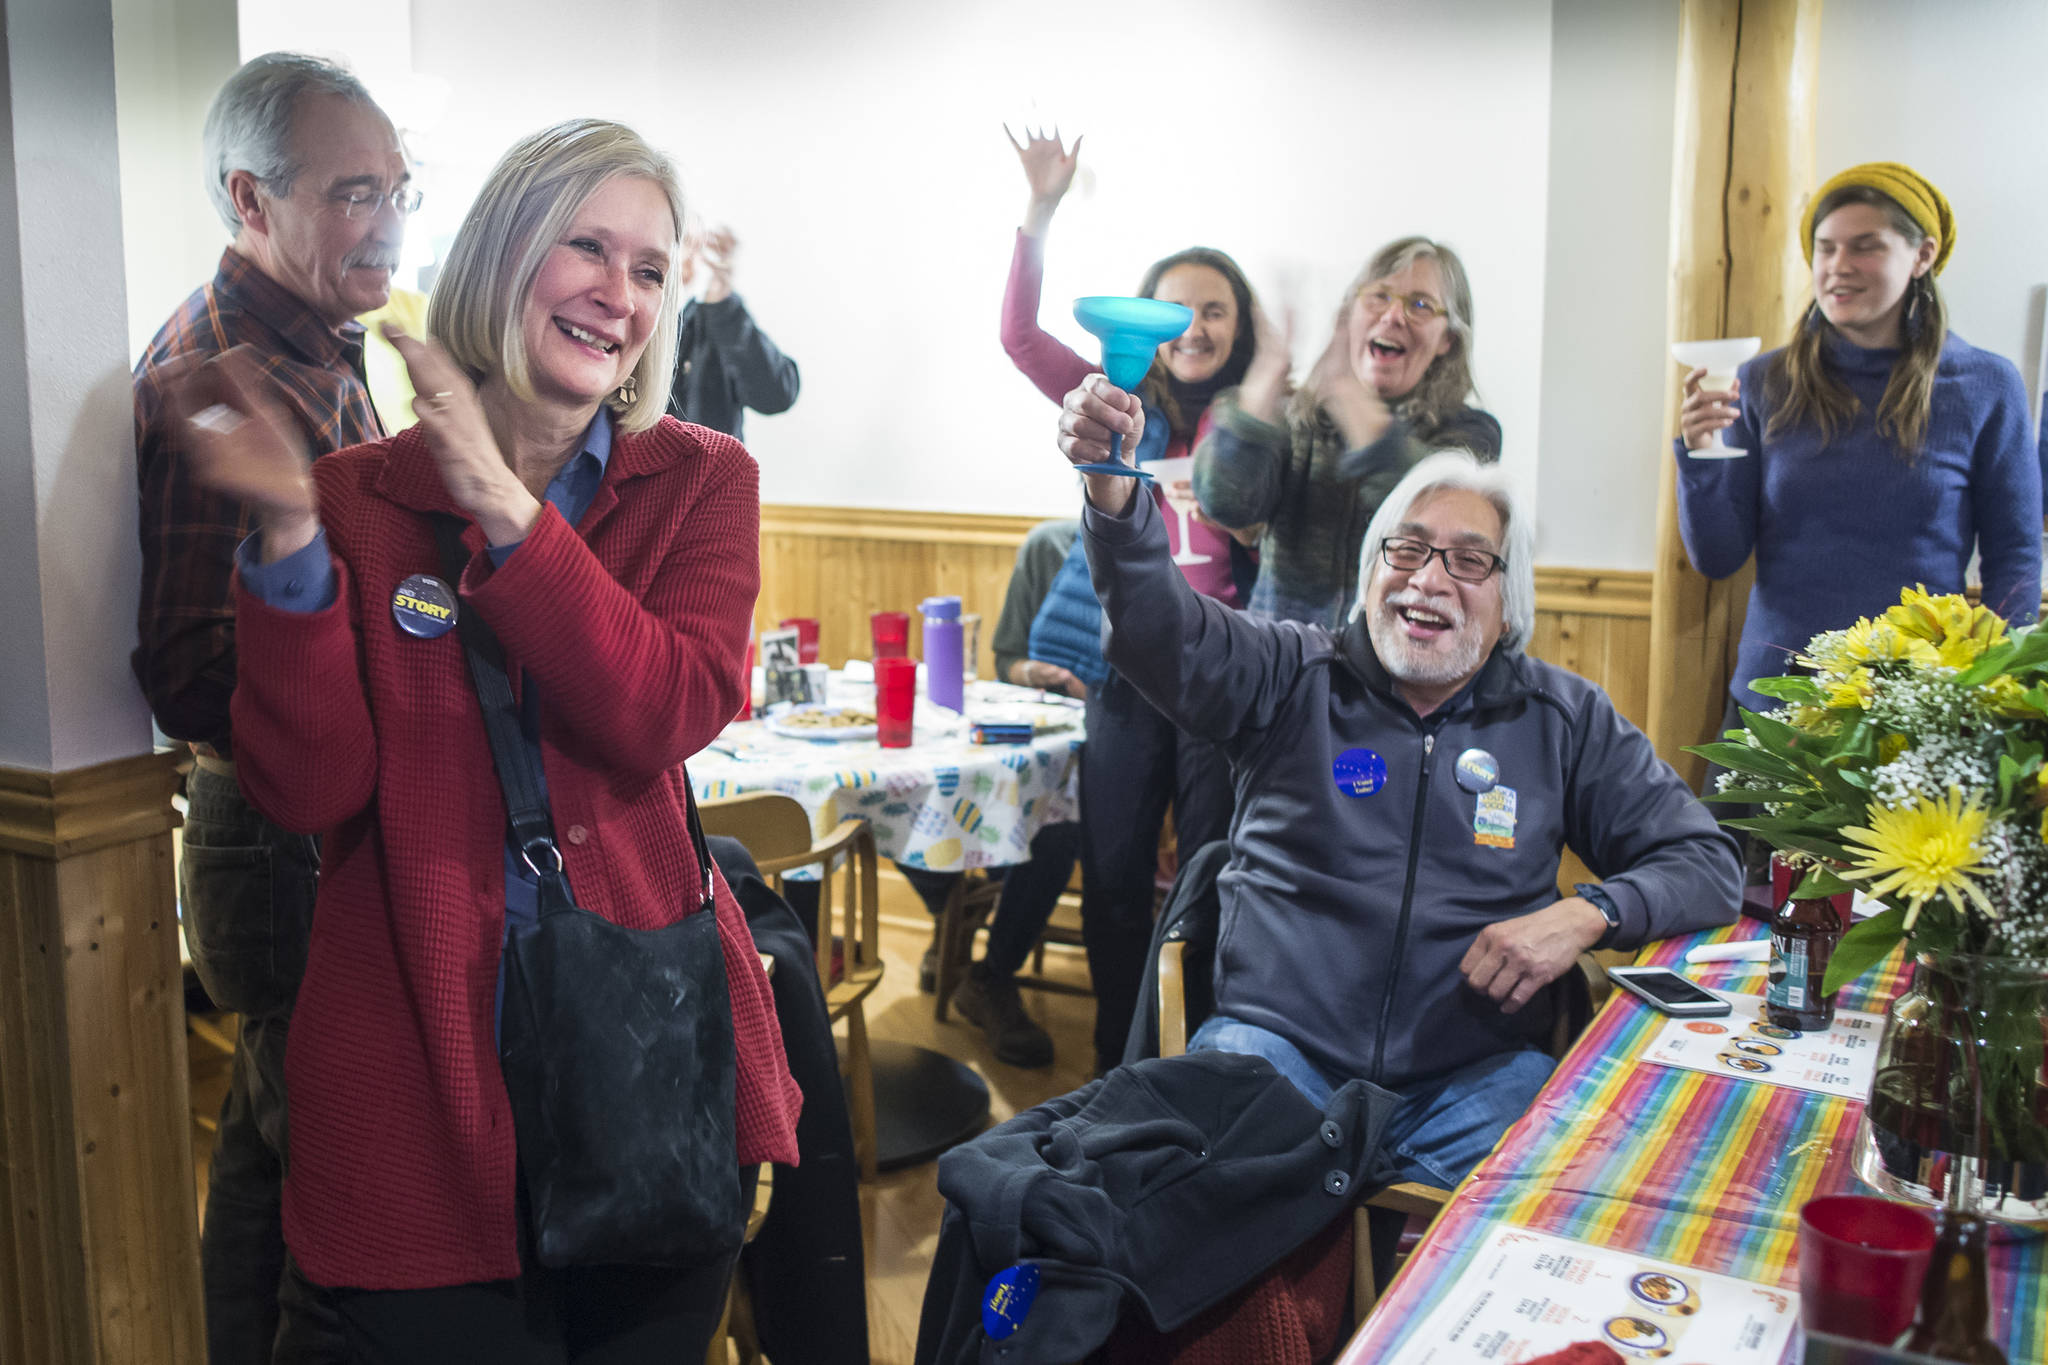 Andi Story, Democratic candidate for House District 34, celebrates her election night win with family on Tuesday. Story defeated Republican candidate Jerry Nankervis to take hold of one of three contested statehouse seats. (Michael Penn | Juneau Empire)